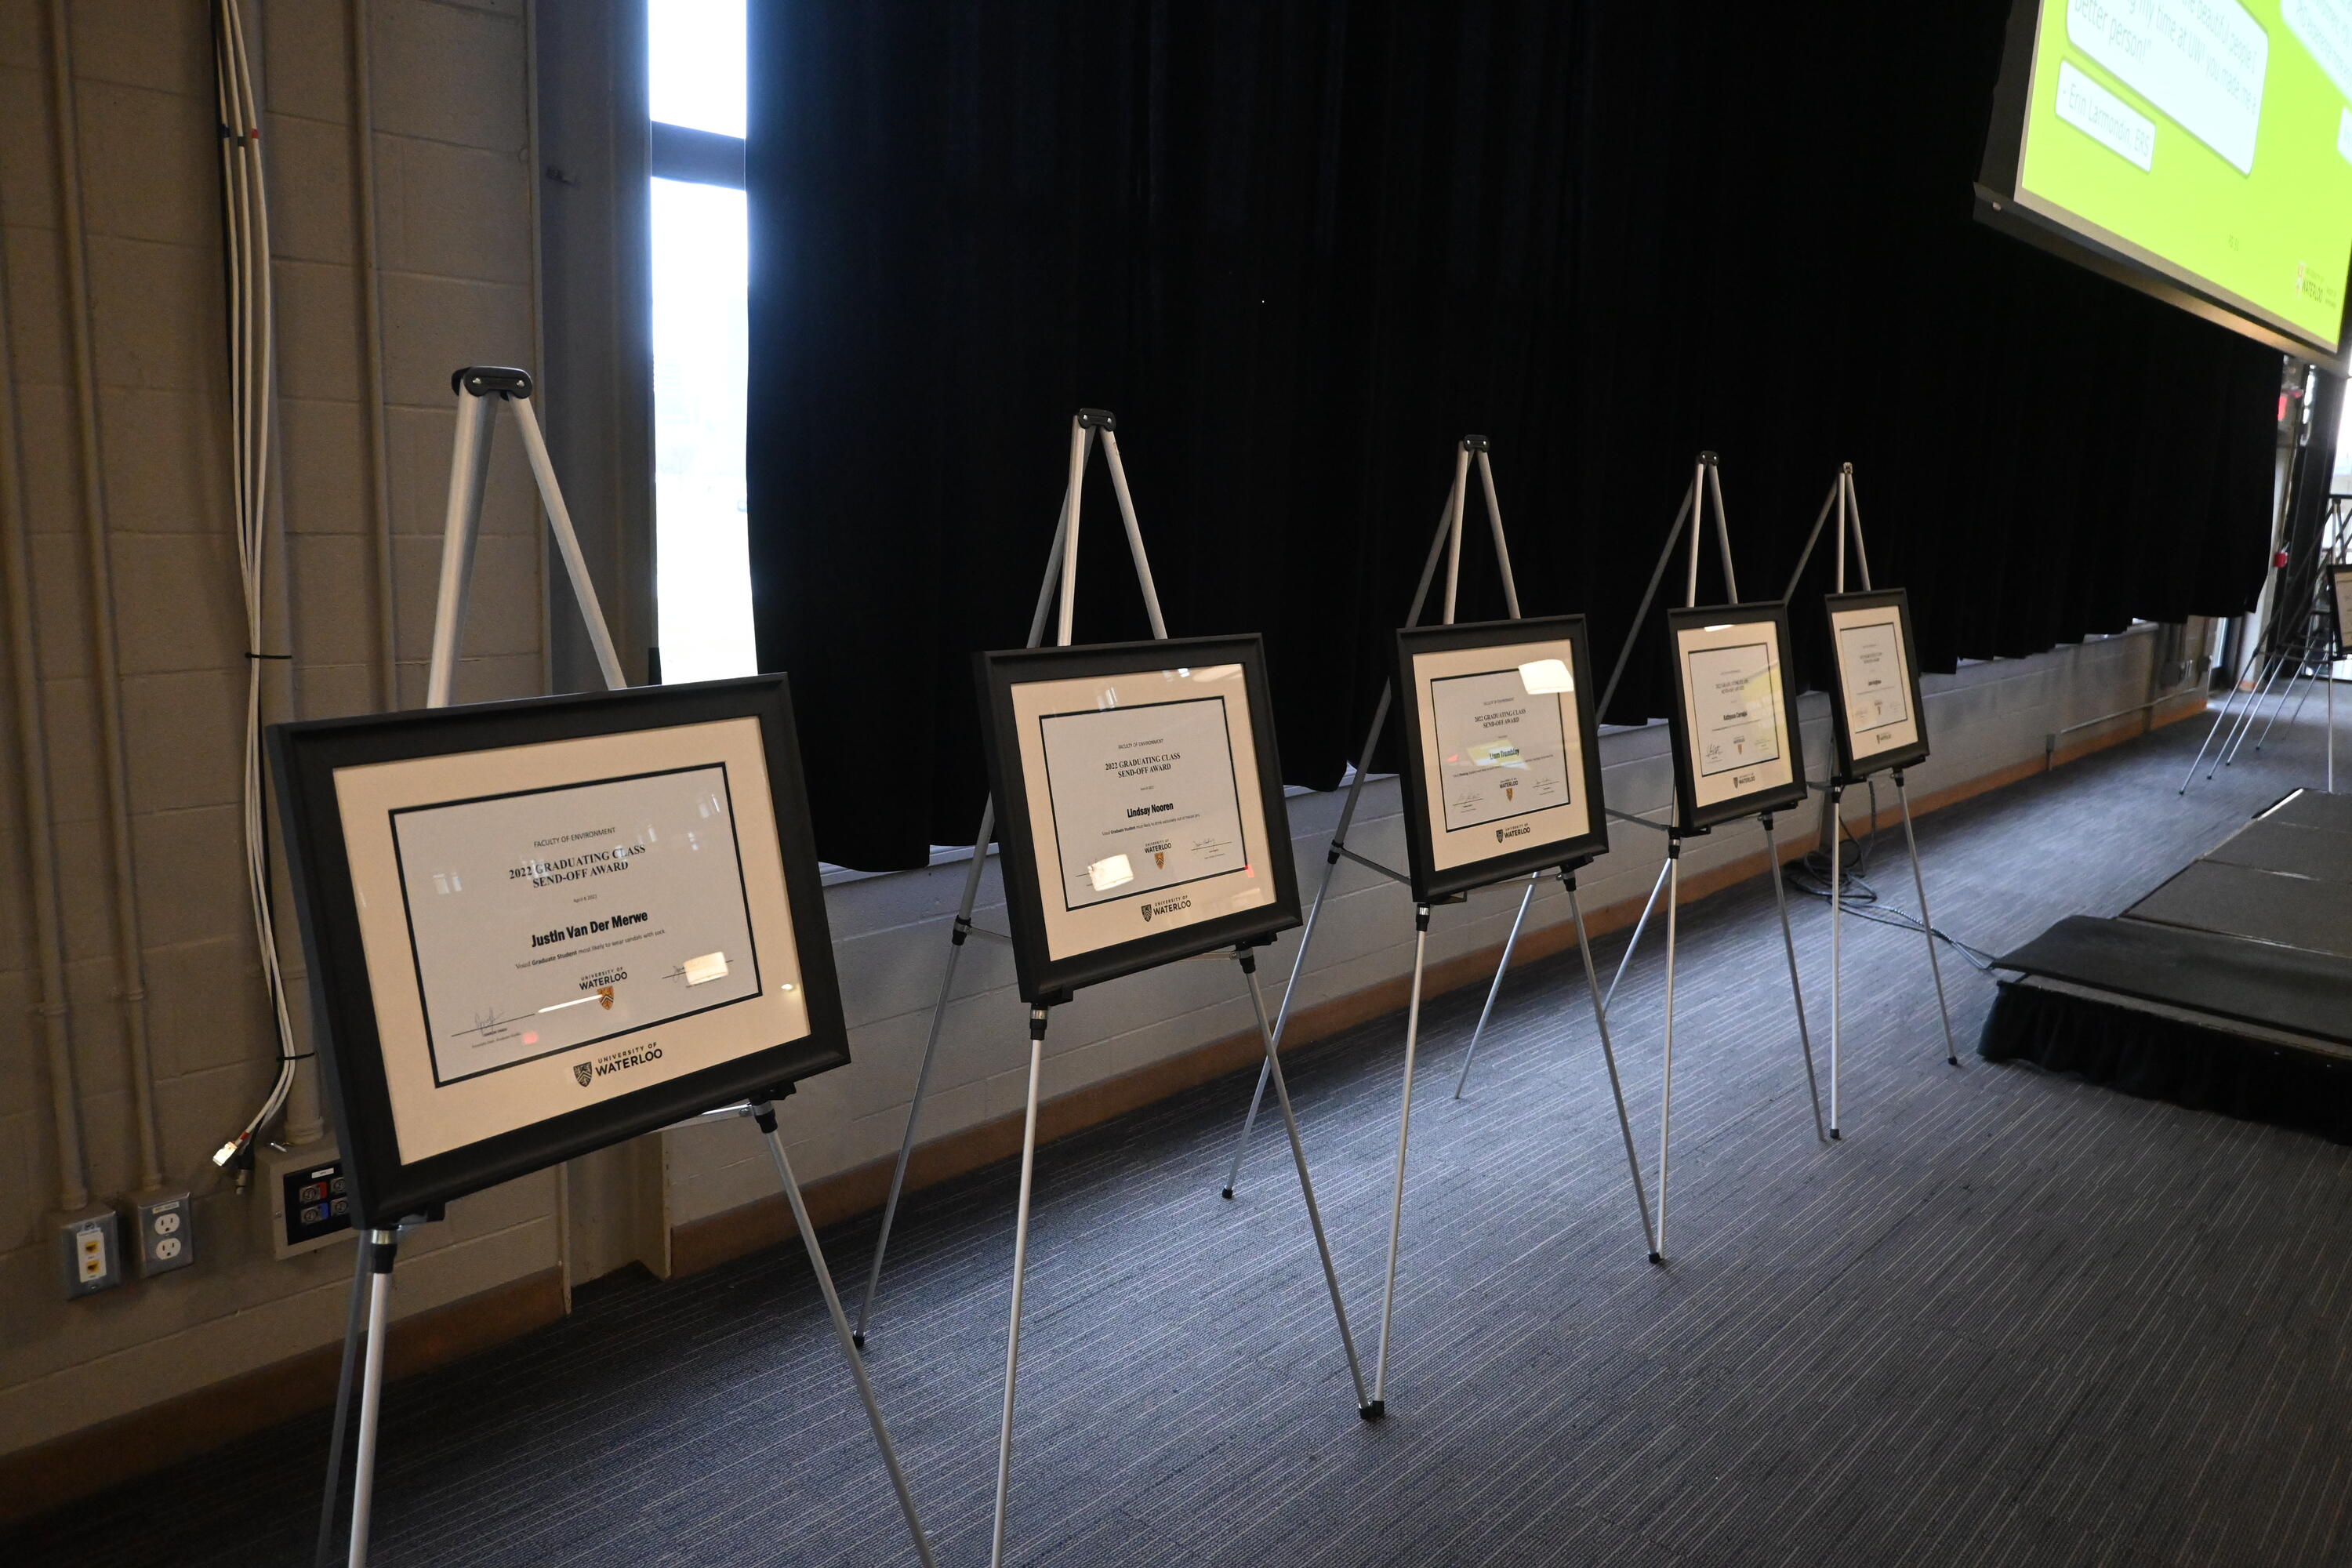 Five award certificates displayed on easels